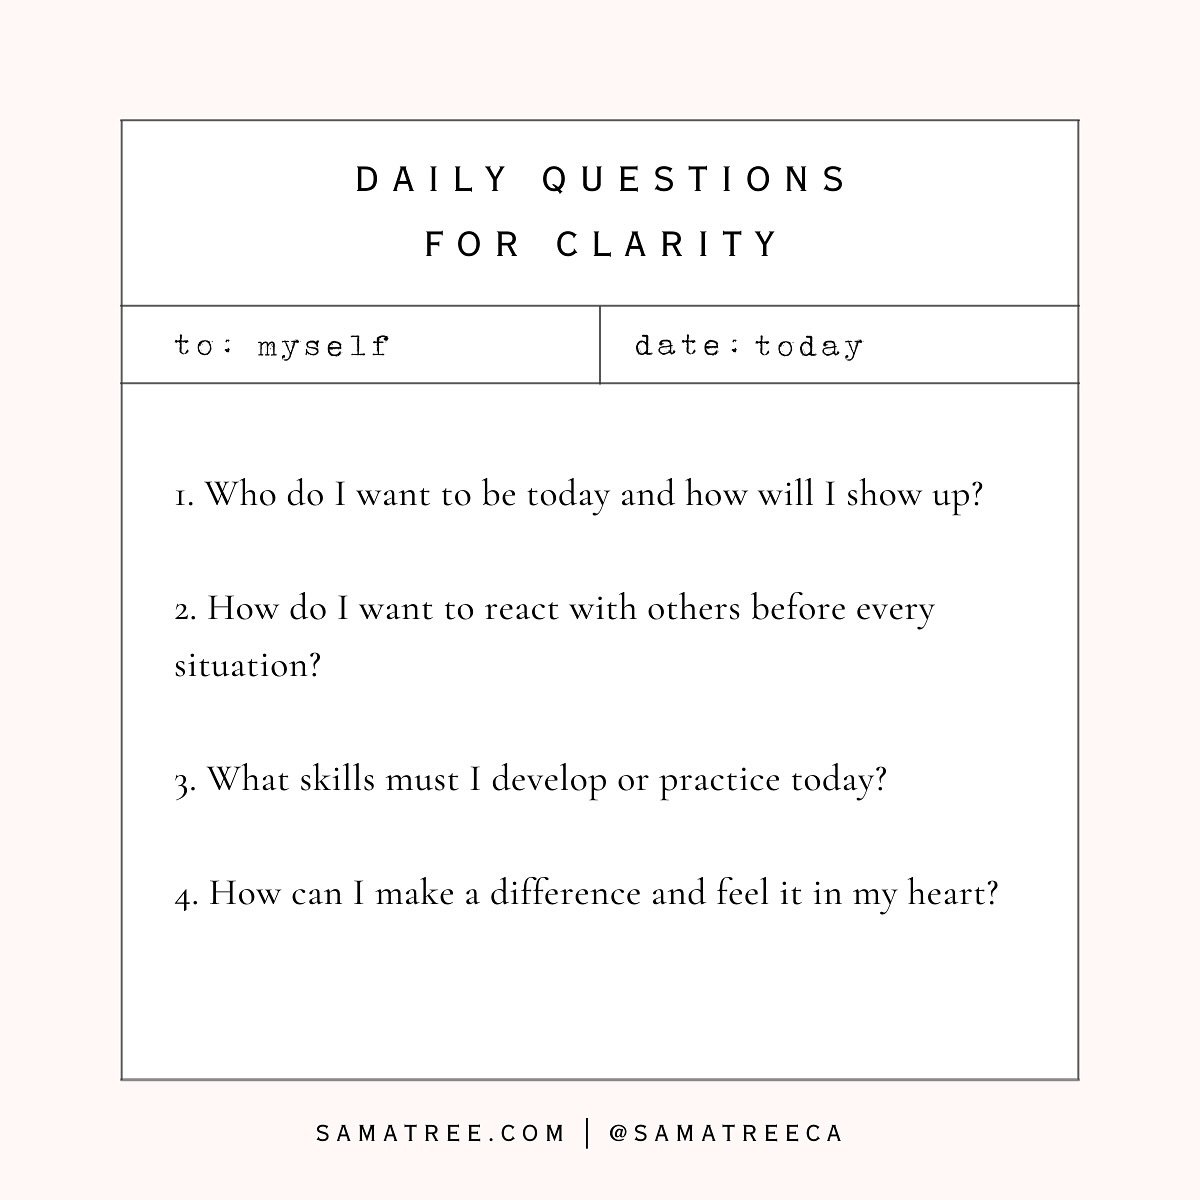 I&rsquo;m sharing a daily practice that I spoke about in a recent yin yoga class I taught. 

READ MORE ON MY NEW BLOG POST - &ldquo;DAILY QUESTIONS FOR CREATING CLARITY,&rdquo; LINK IN BIO, &ldquo;BLOG&rdquo;

Here are my 4 questions for creating cla